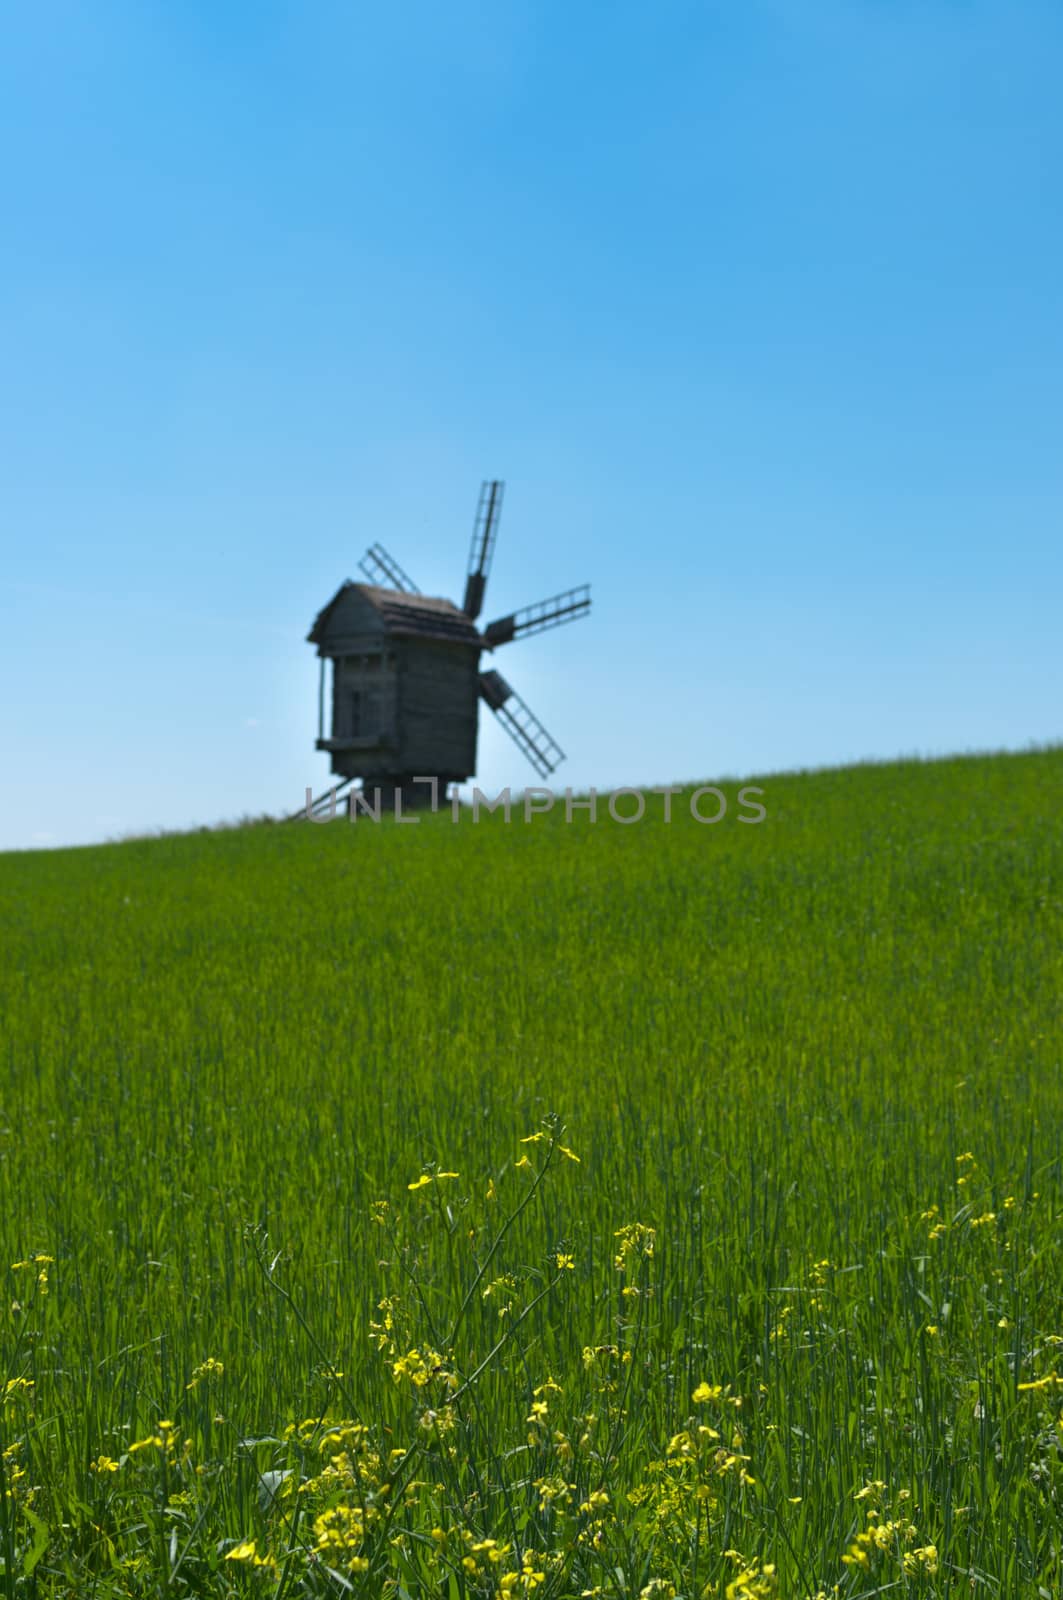 Old wooden windmill on horizon. Clear, sunny summer day. In the foreground is fresh green grass and flower.